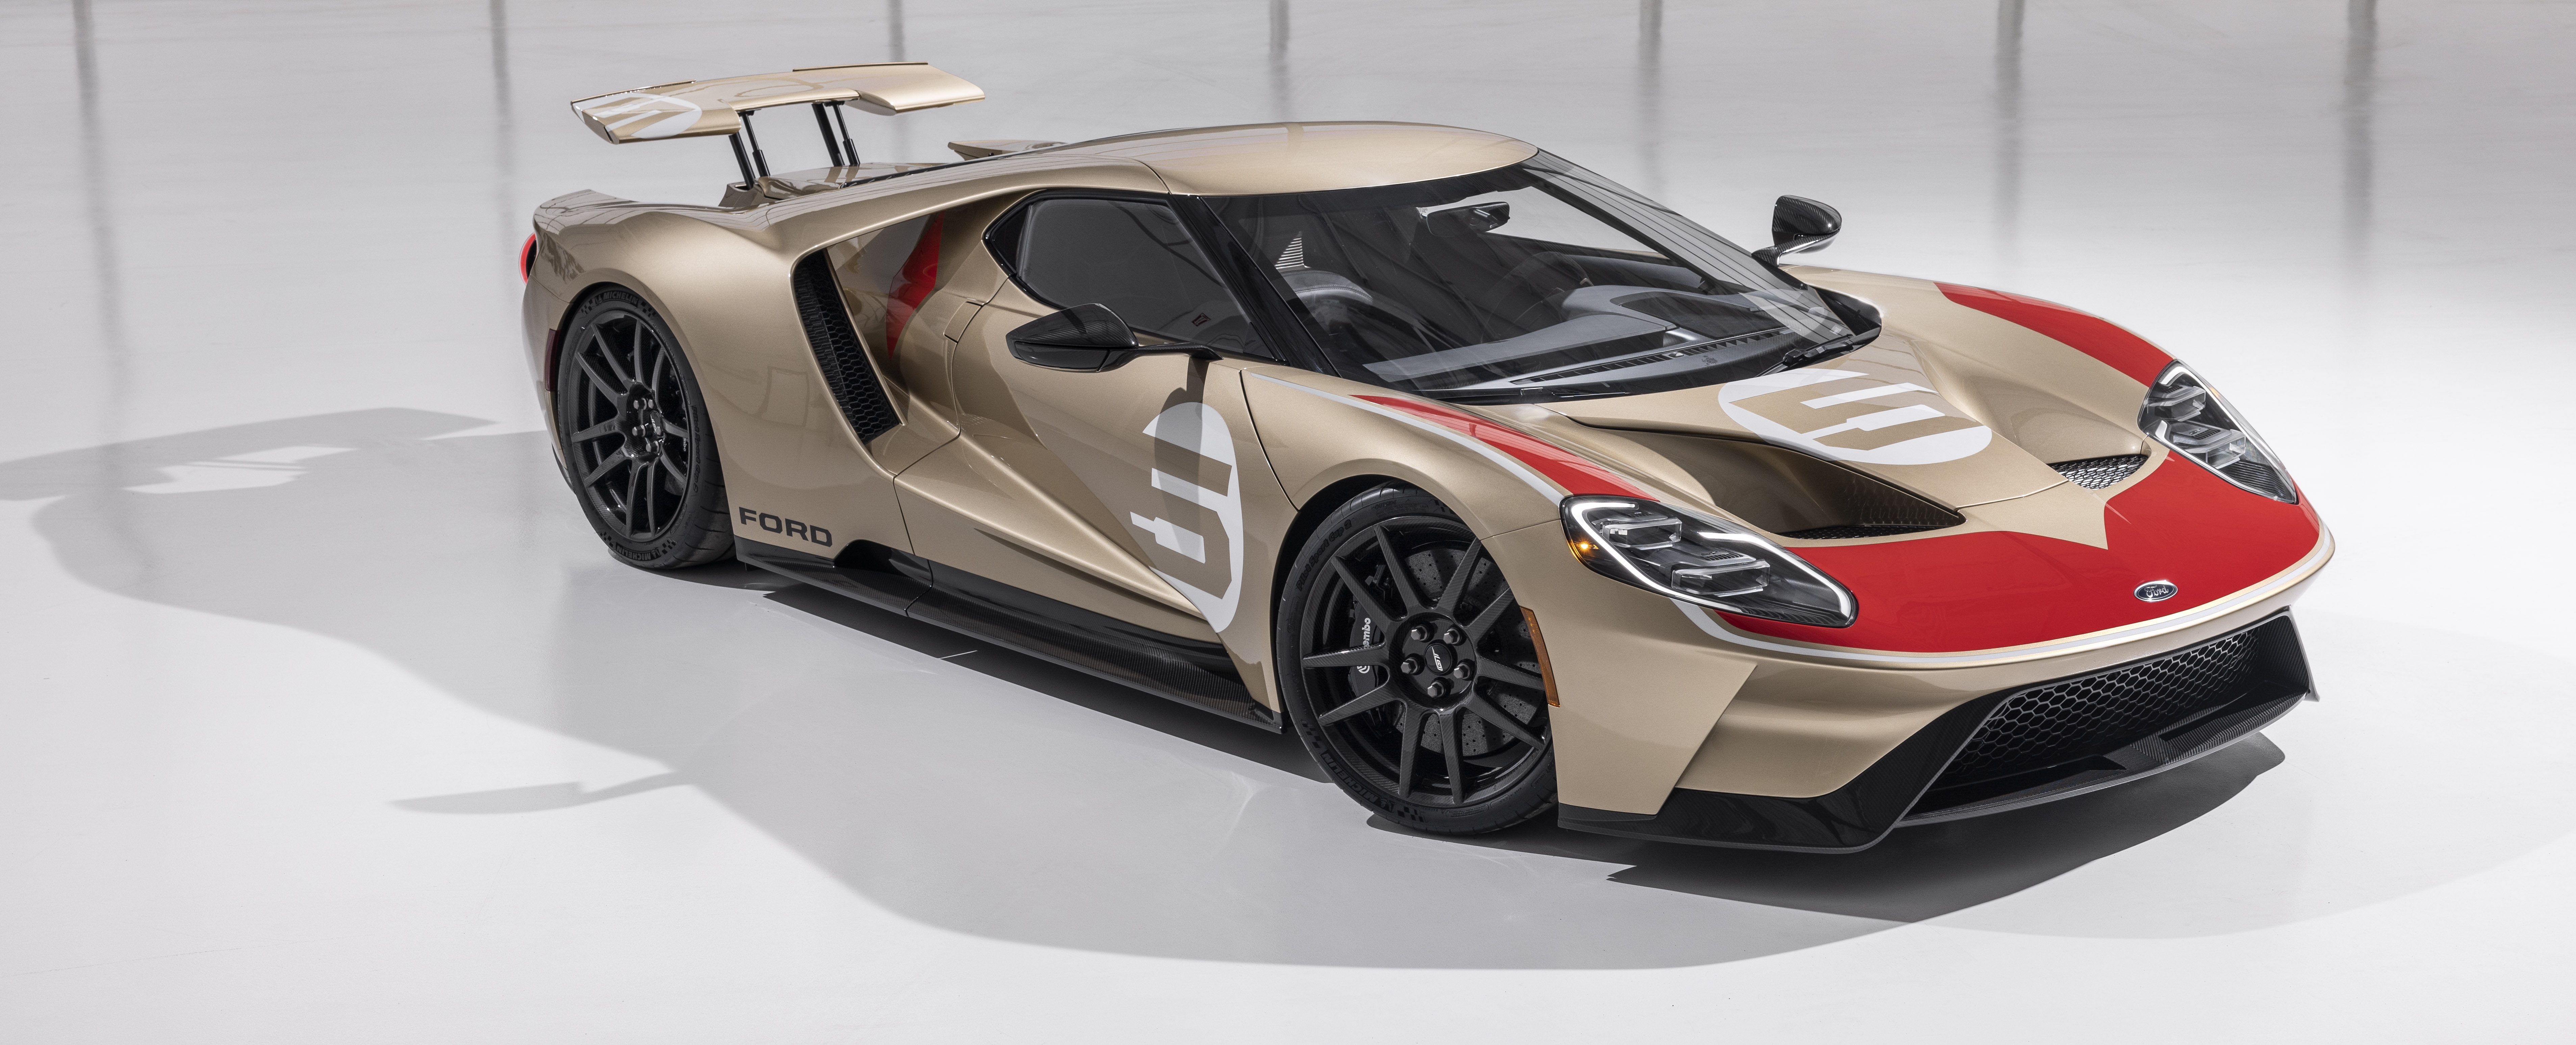 HD wallpaper, 5K, Special Edition, 8K, 2022, Supercars, Ford Gt Holman Moody Heritage Edition, Ford Gt, Heritage Edition